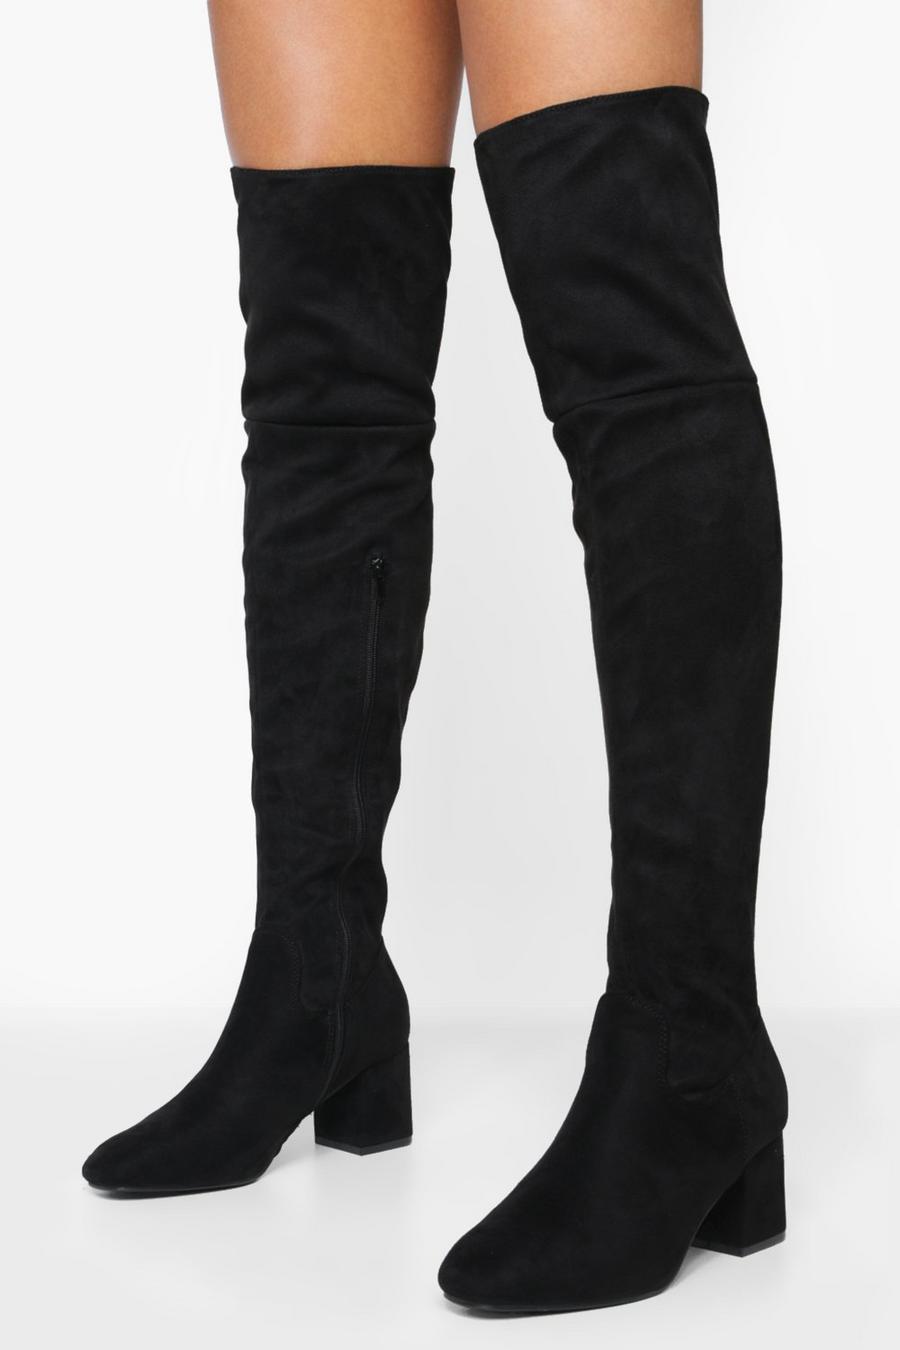 Womens Low Heel faux Suede casual Knee high Boots Plus Size